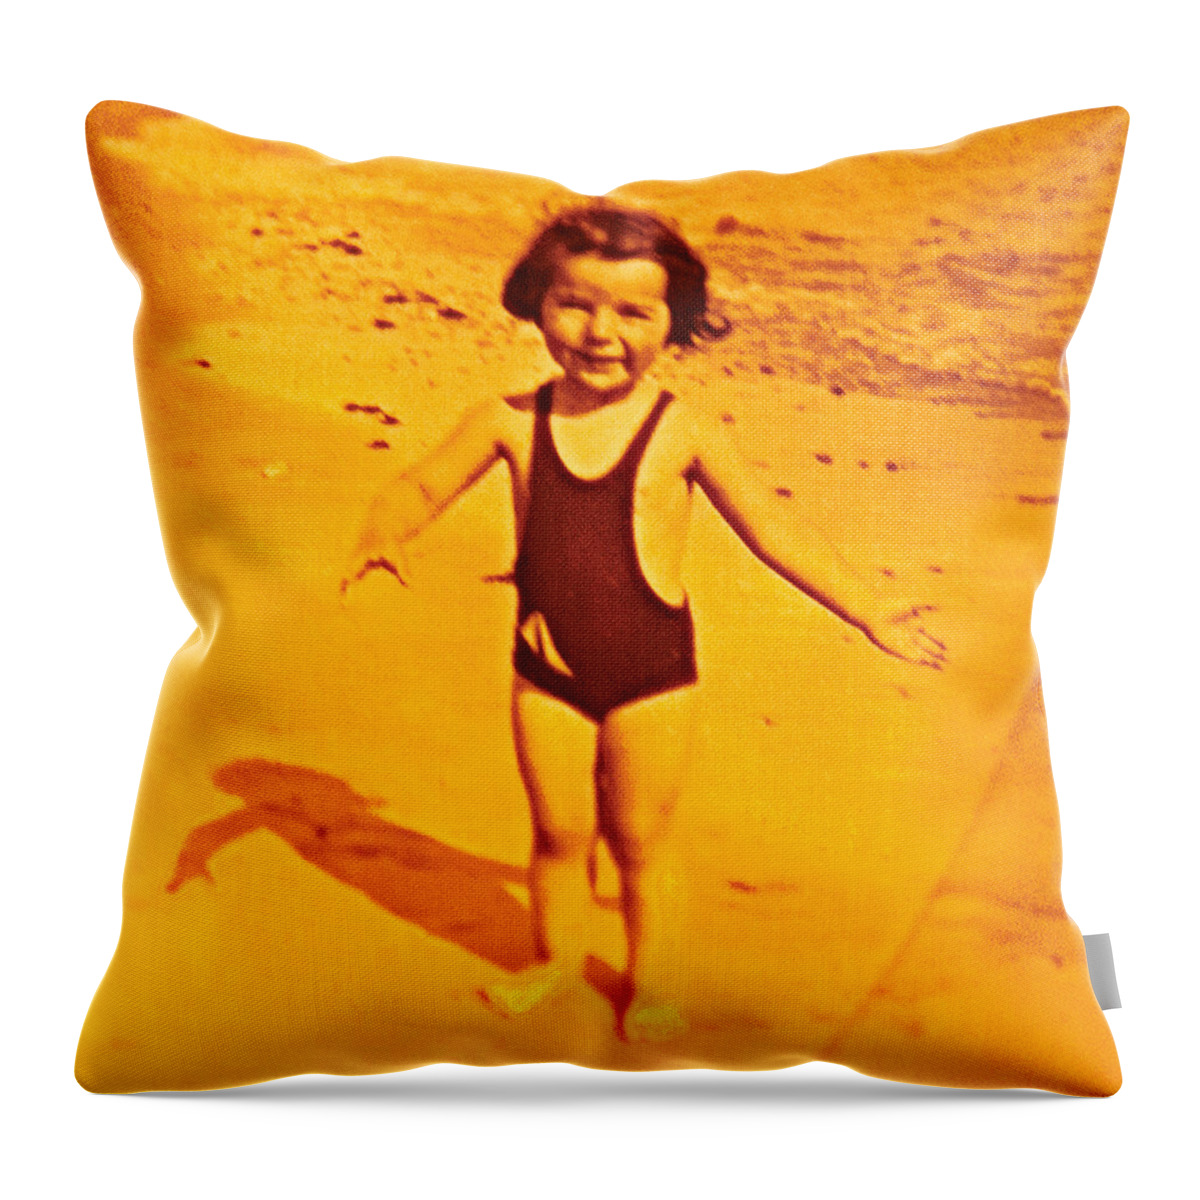 Old Images Throw Pillow featuring the photograph On The Beach by David Davies